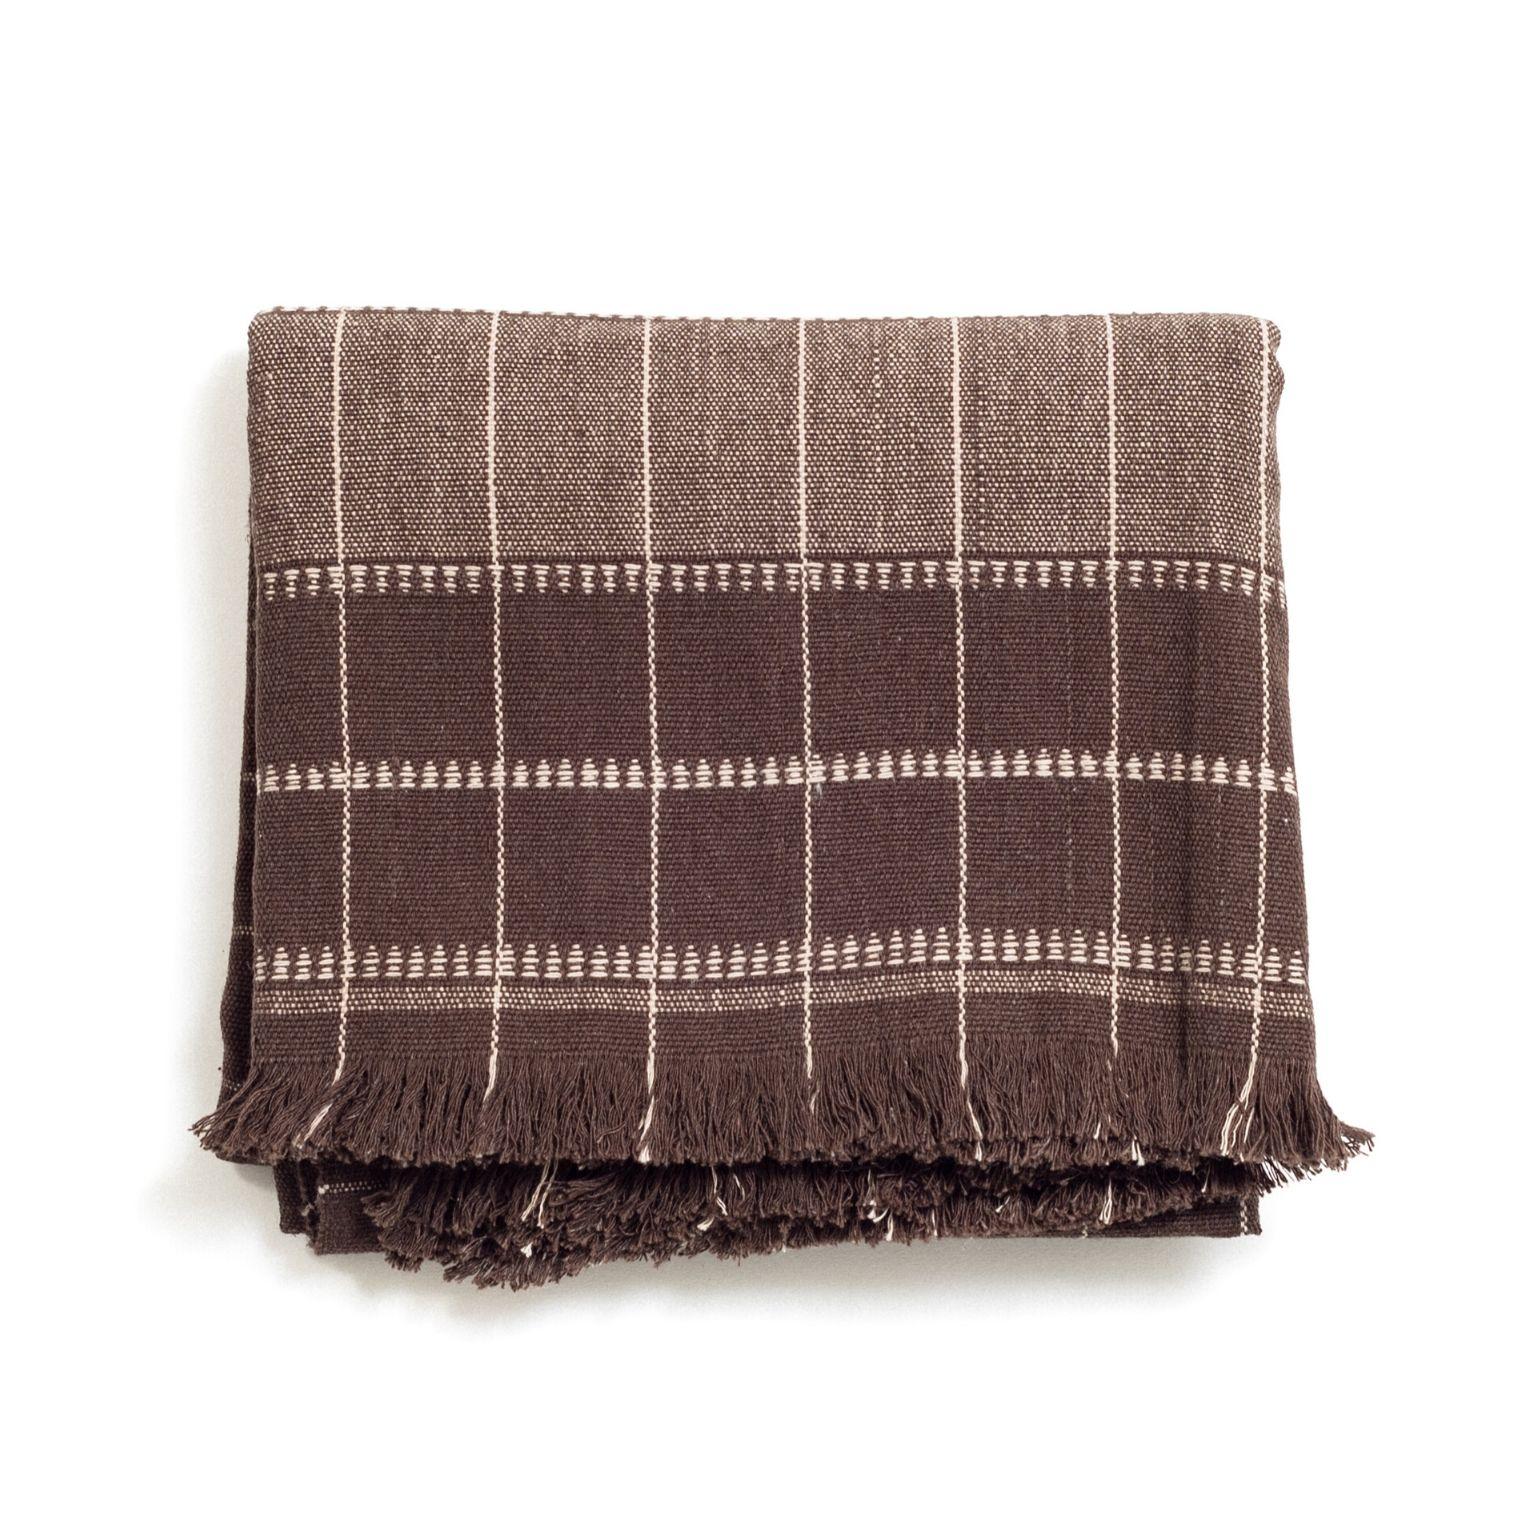 Custom design by Studio Variously, TREACLE is a organic cotton throw / blanket is handwoven by master weavers in Nepal.

A sustainable design brand based out of Michigan, Studio Variously exclusively collaborates with artisan communities to restore